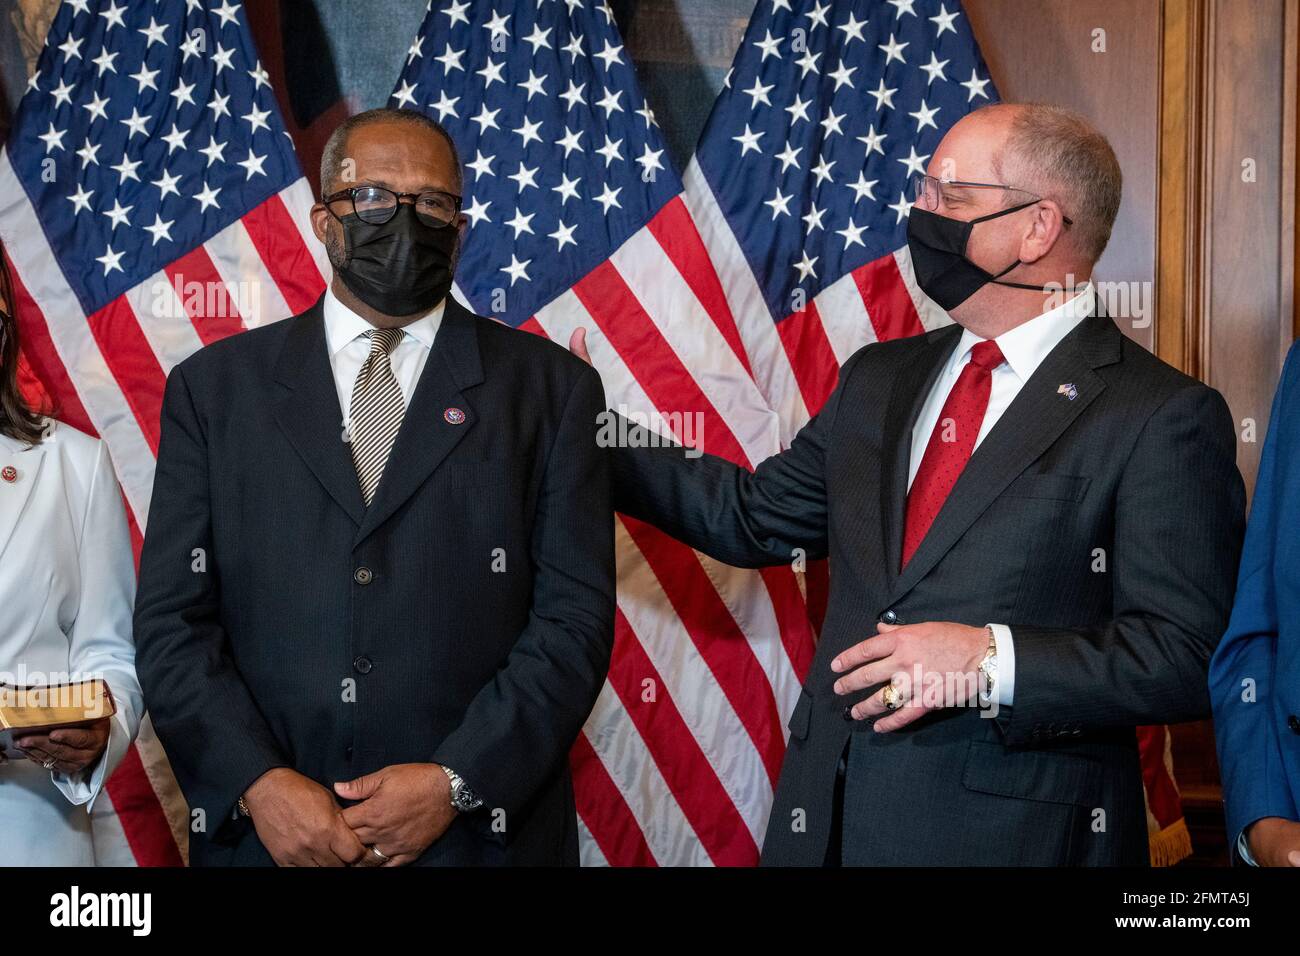 Washington, United States Of America. 11th May, 2021. United States Representative Troy Carter (Democrat of Louisiana), left, is joined by Louisiana Gov. John Bel Edwards, right, during his ceremonial swearing-in by Speaker of the United States House of Representatives Nancy Pelosi (Democrat of California) at the US Capitol in Washington, DC, Tuesday, May 11, 2021. Credit: Rod Lamkey/CNP | usage worldwide Credit: dpa/Alamy Live News Stock Photo